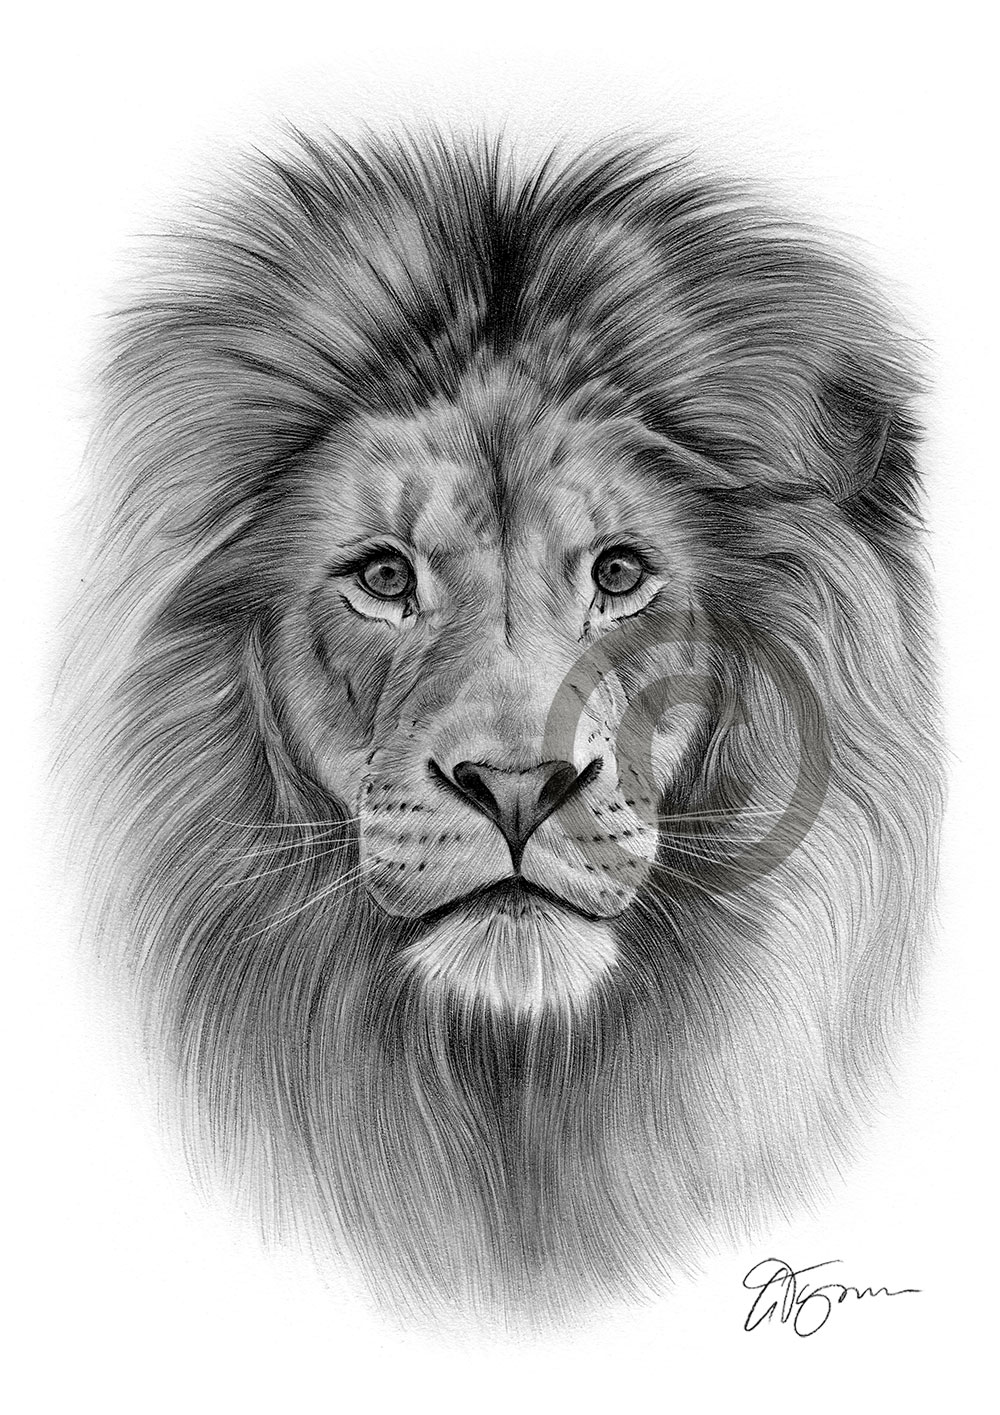 AFRICAN LION artwork pencil drawing print A3 / A4 sizes signed by UK